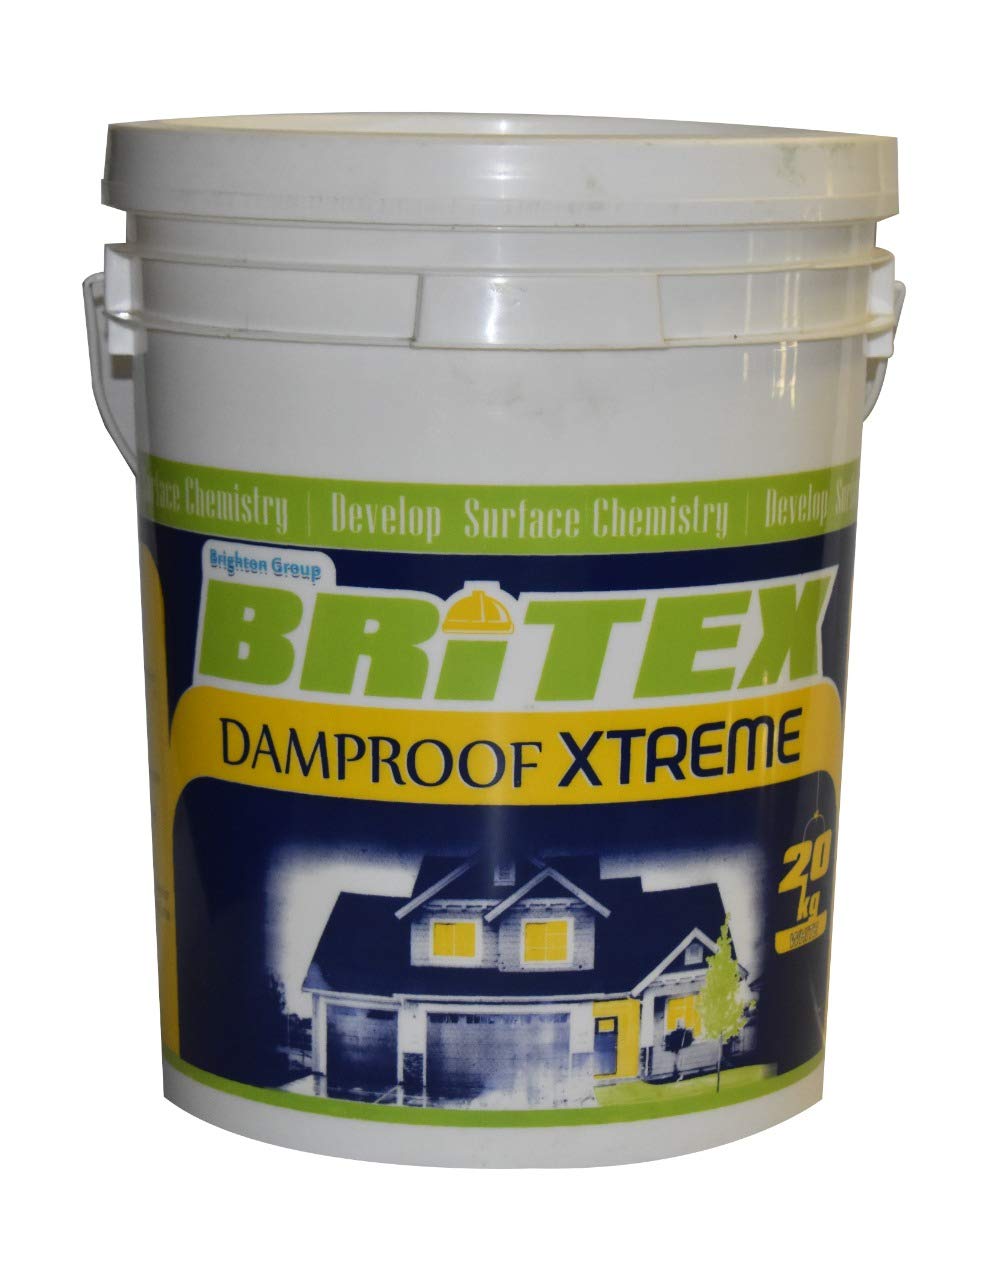 Damproof Xtreme Strong PU Hybrid Membrane for Waterproofing-20kg